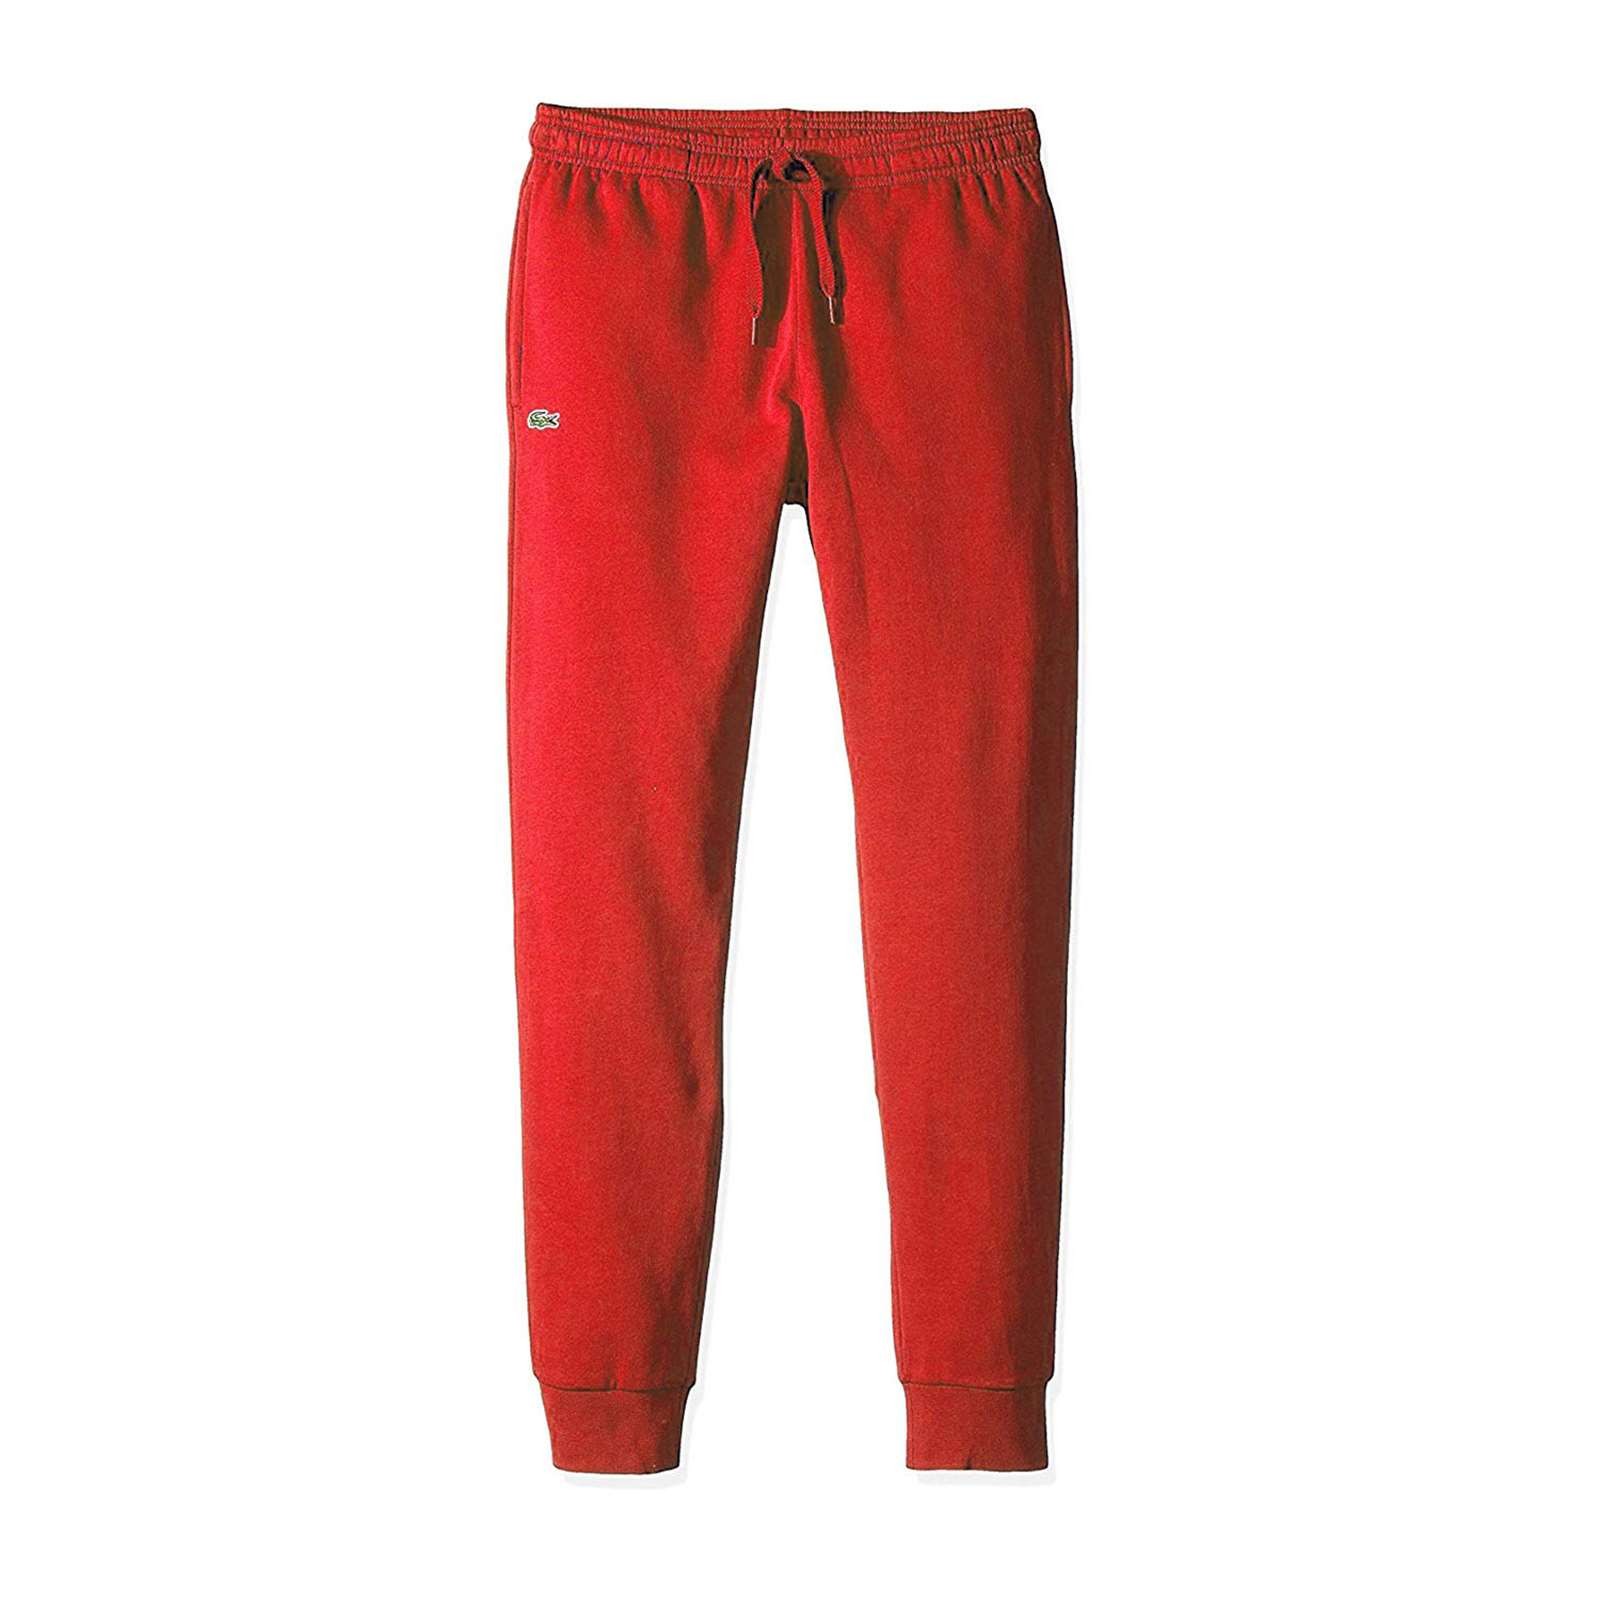 Lacoste Mens Pants | fgqualitykft.hu